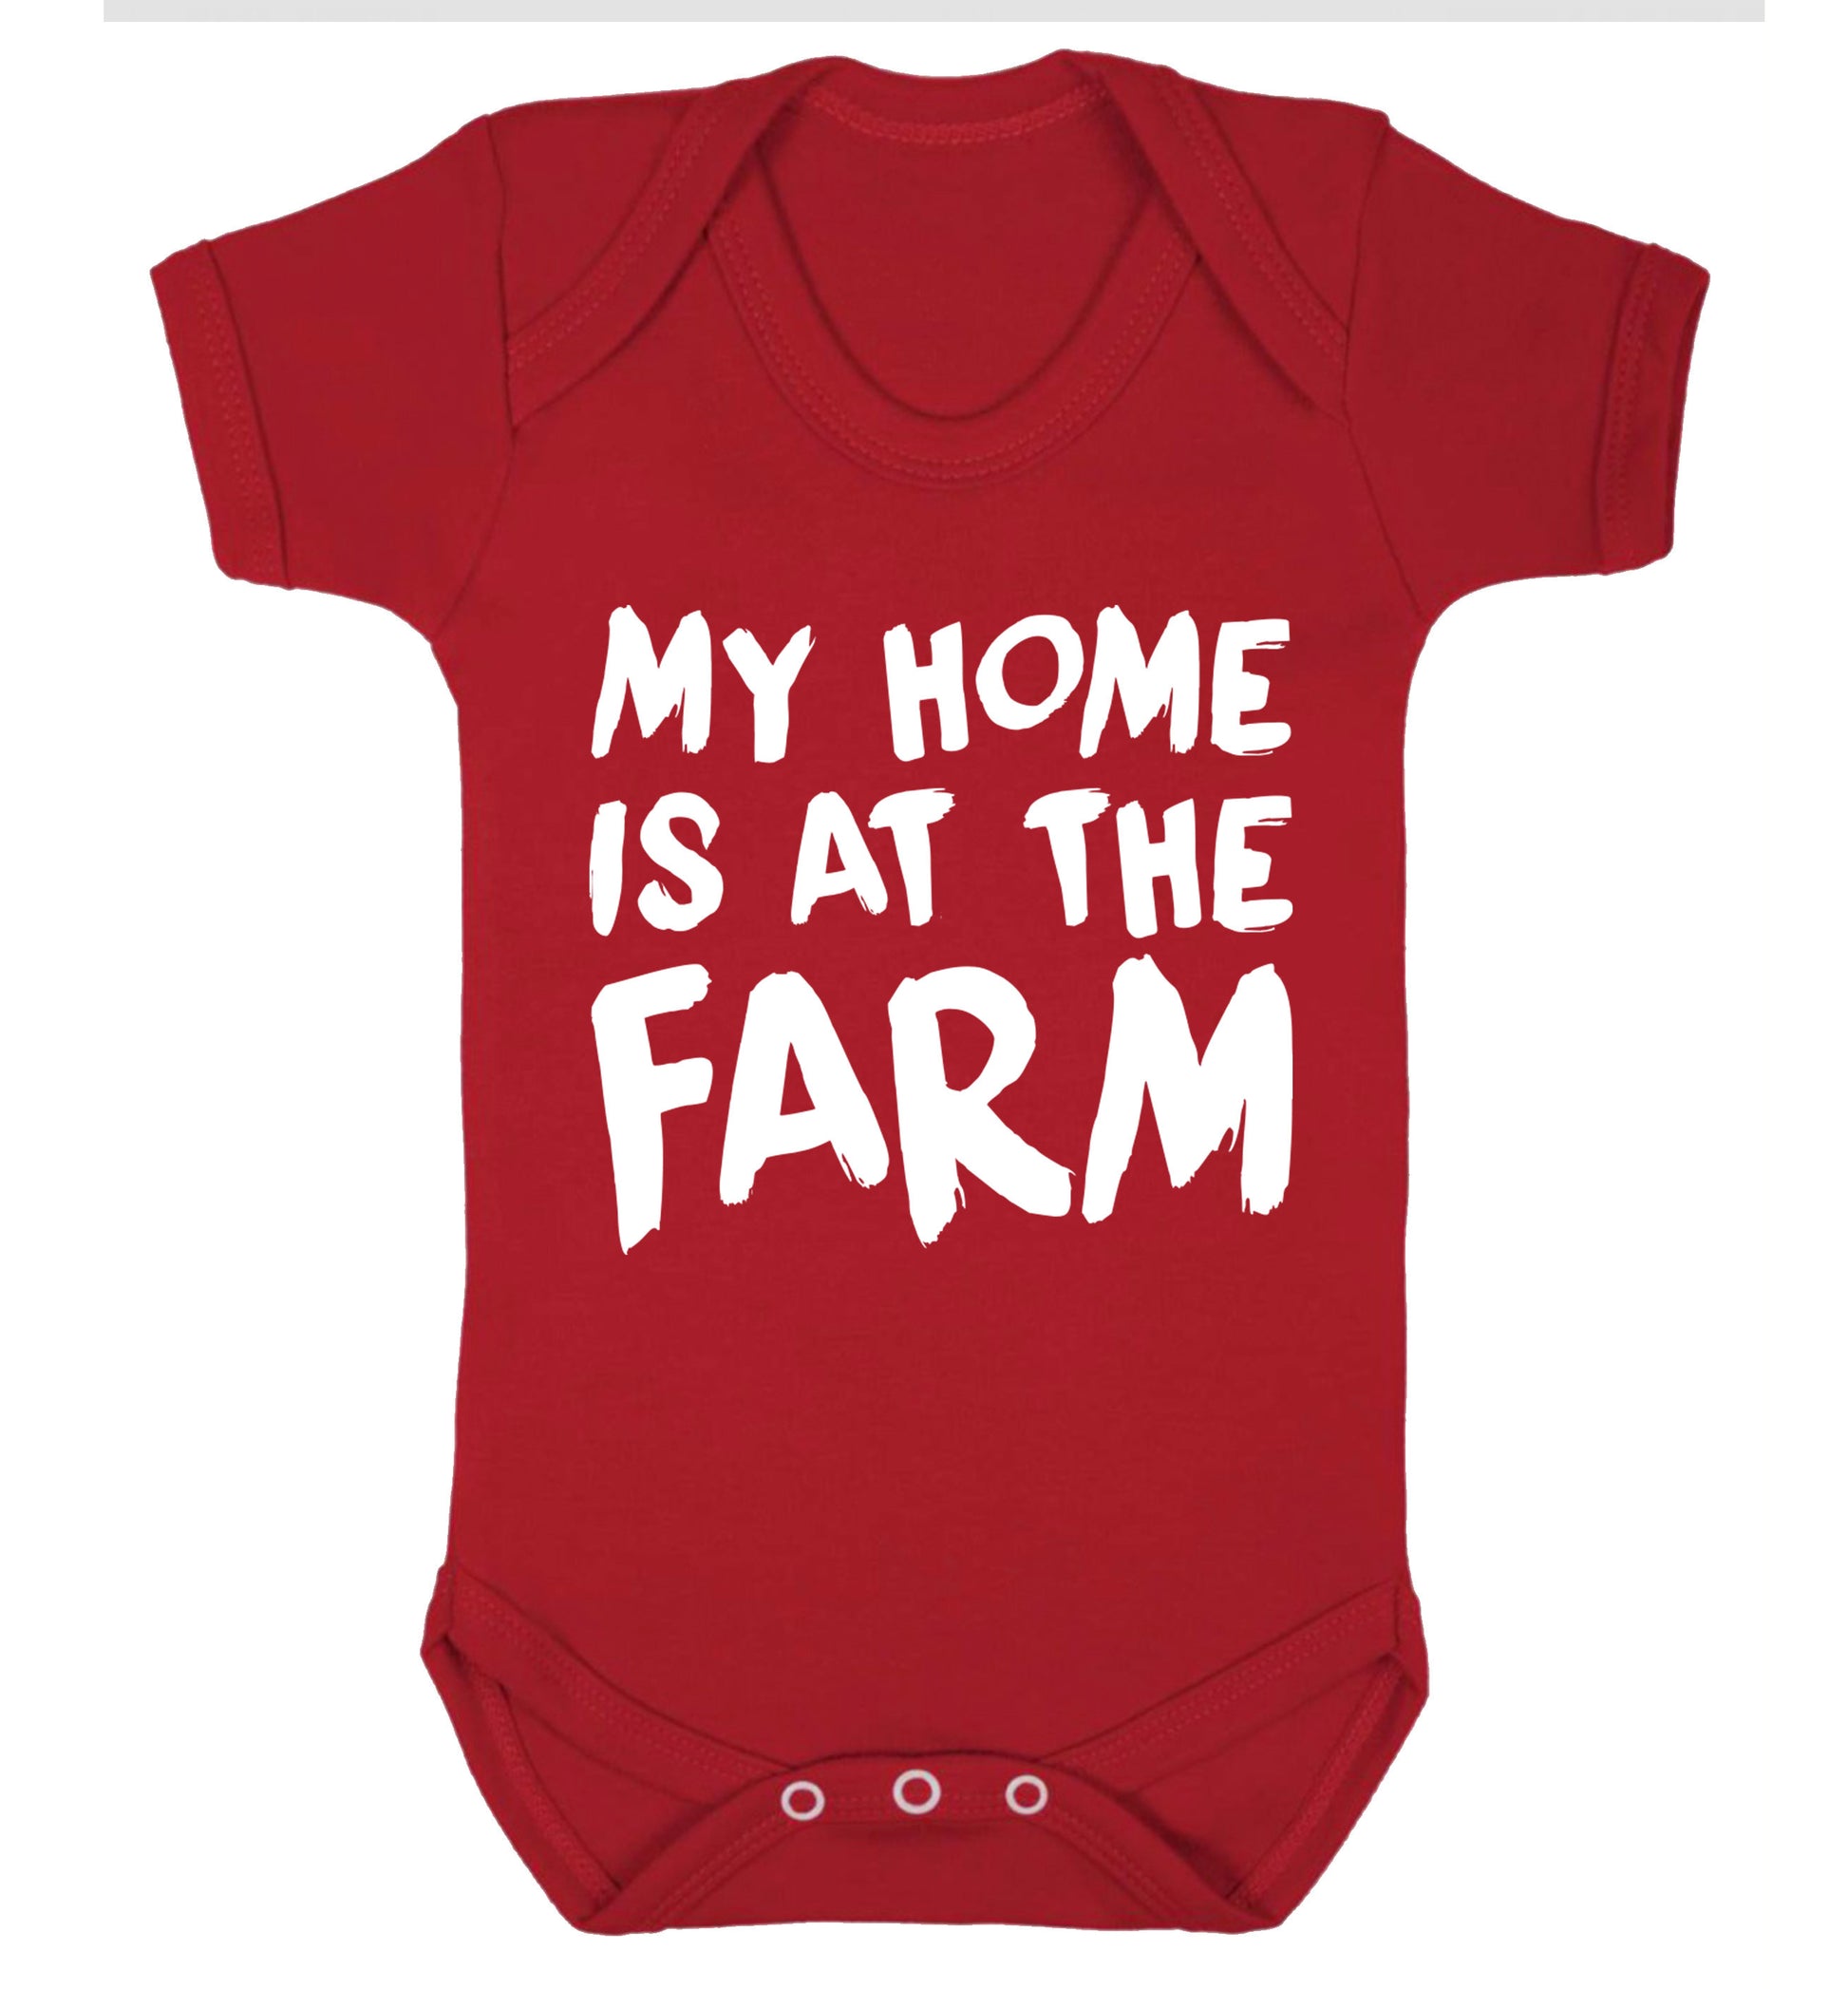 My home is at the farm Baby Vest red 18-24 months